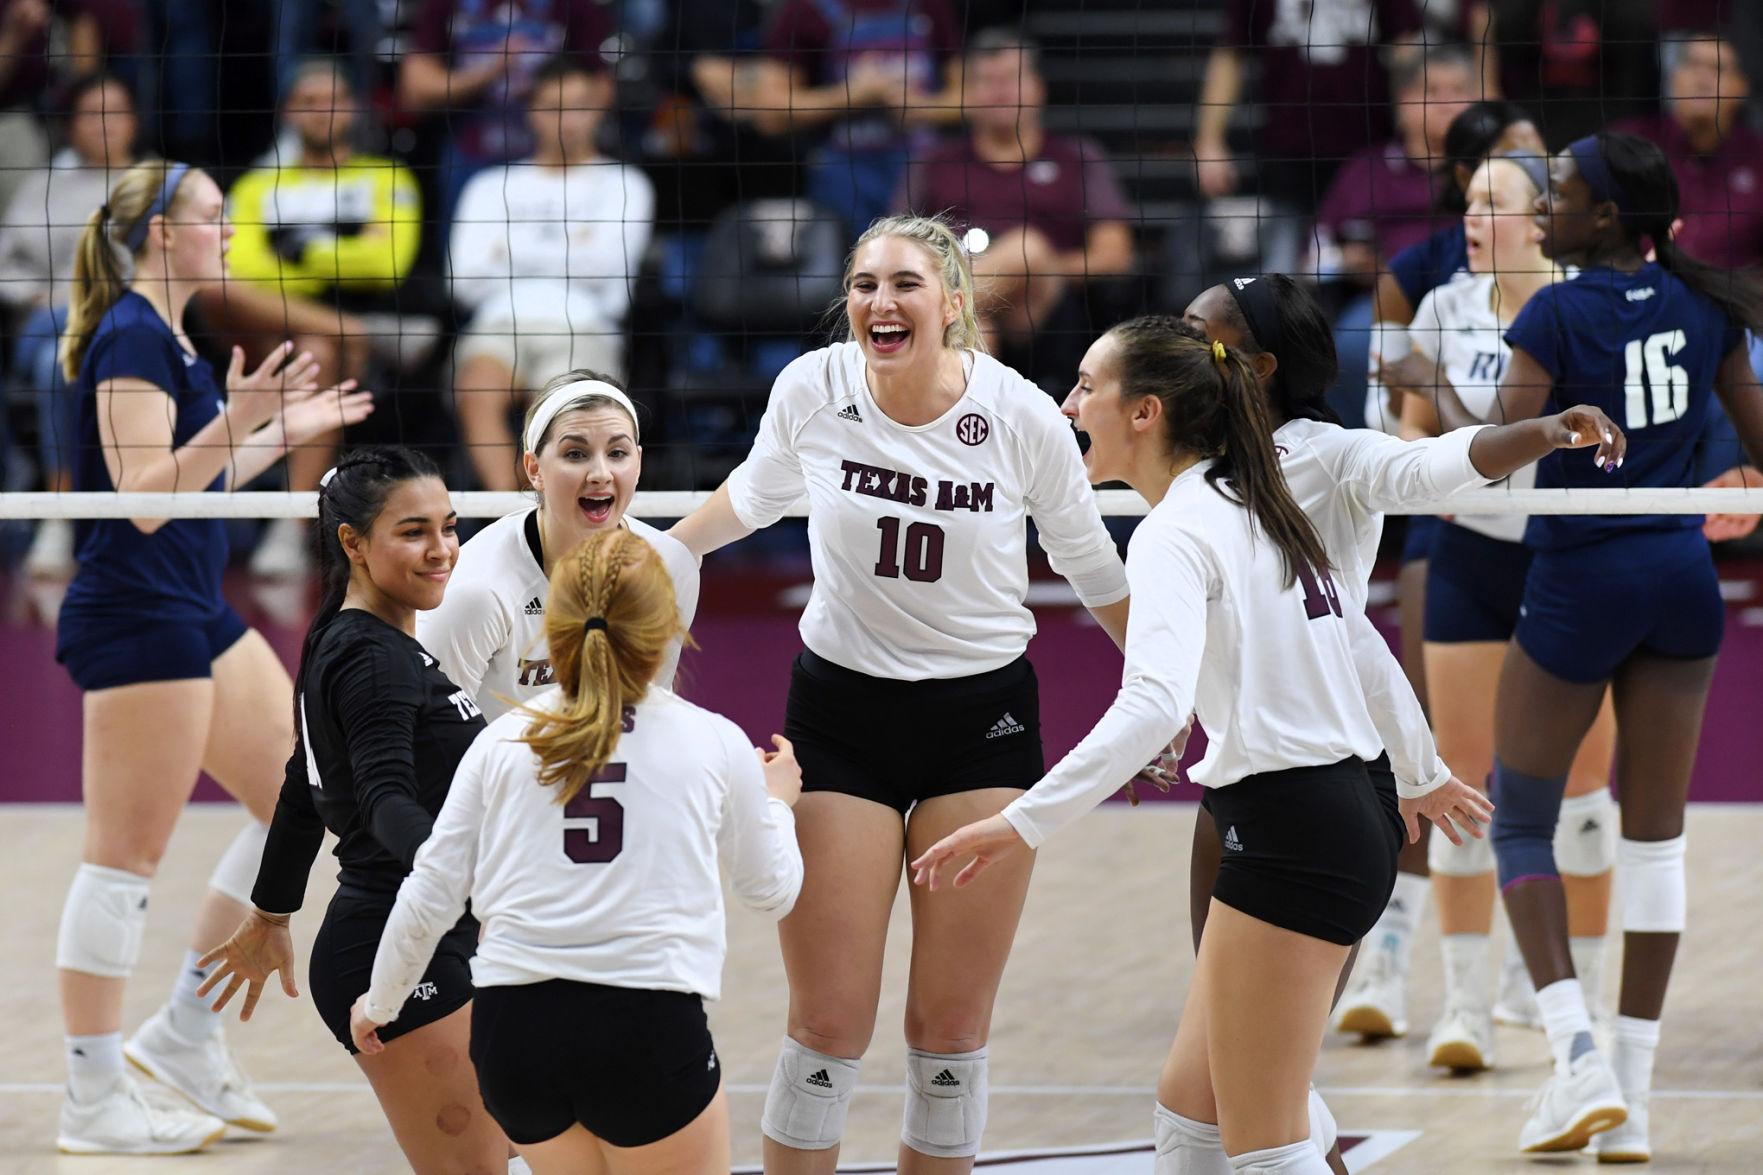 No. 25 Texas A&M volleyball team advances to Sweet 16 with win over No